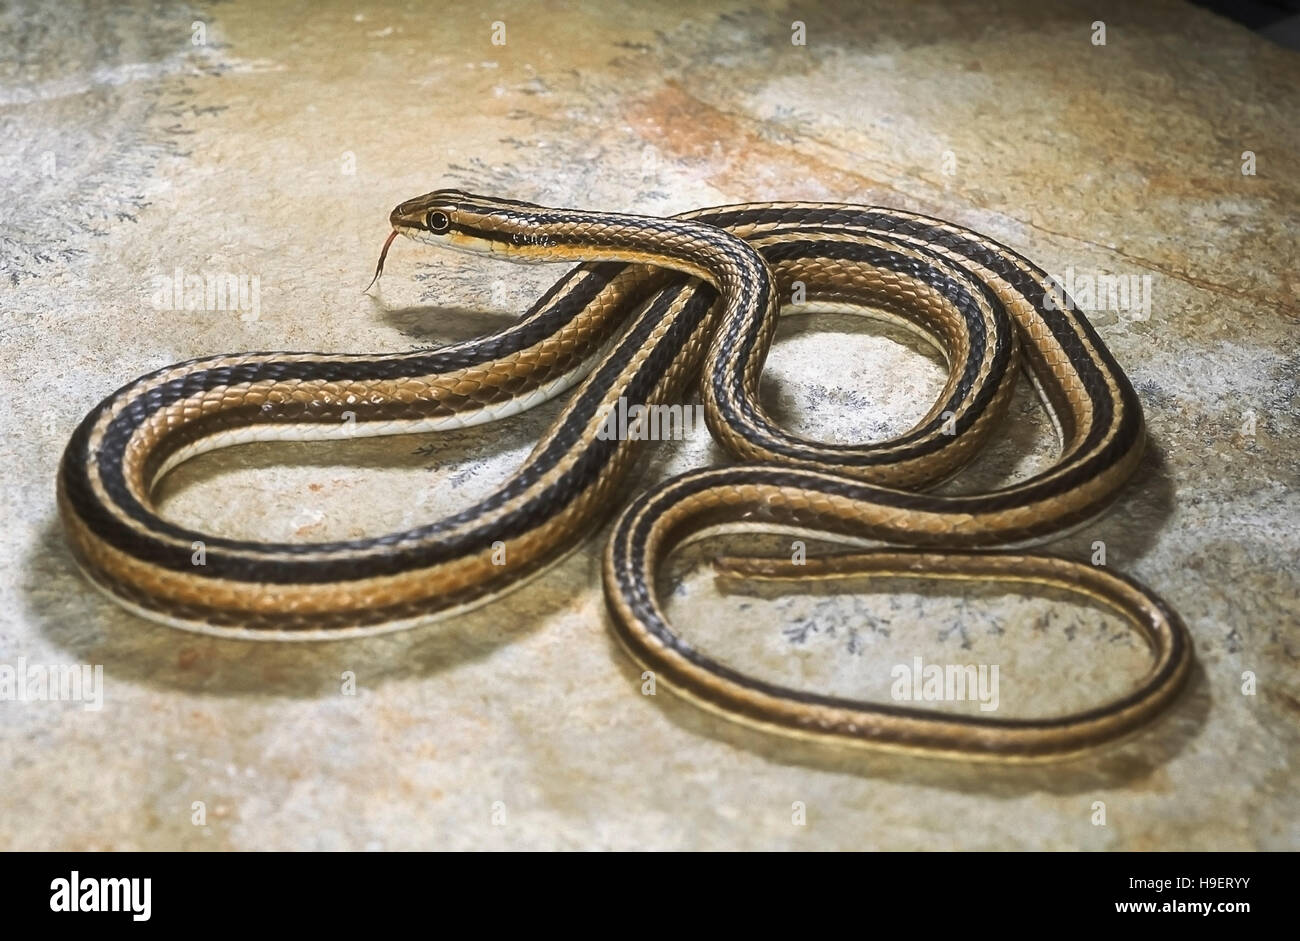 LEITH'S SAND SNAKE Psammophis leithii from Ahmedabad, Gujarat, India. Entire body; tongue visible. Stock Photo